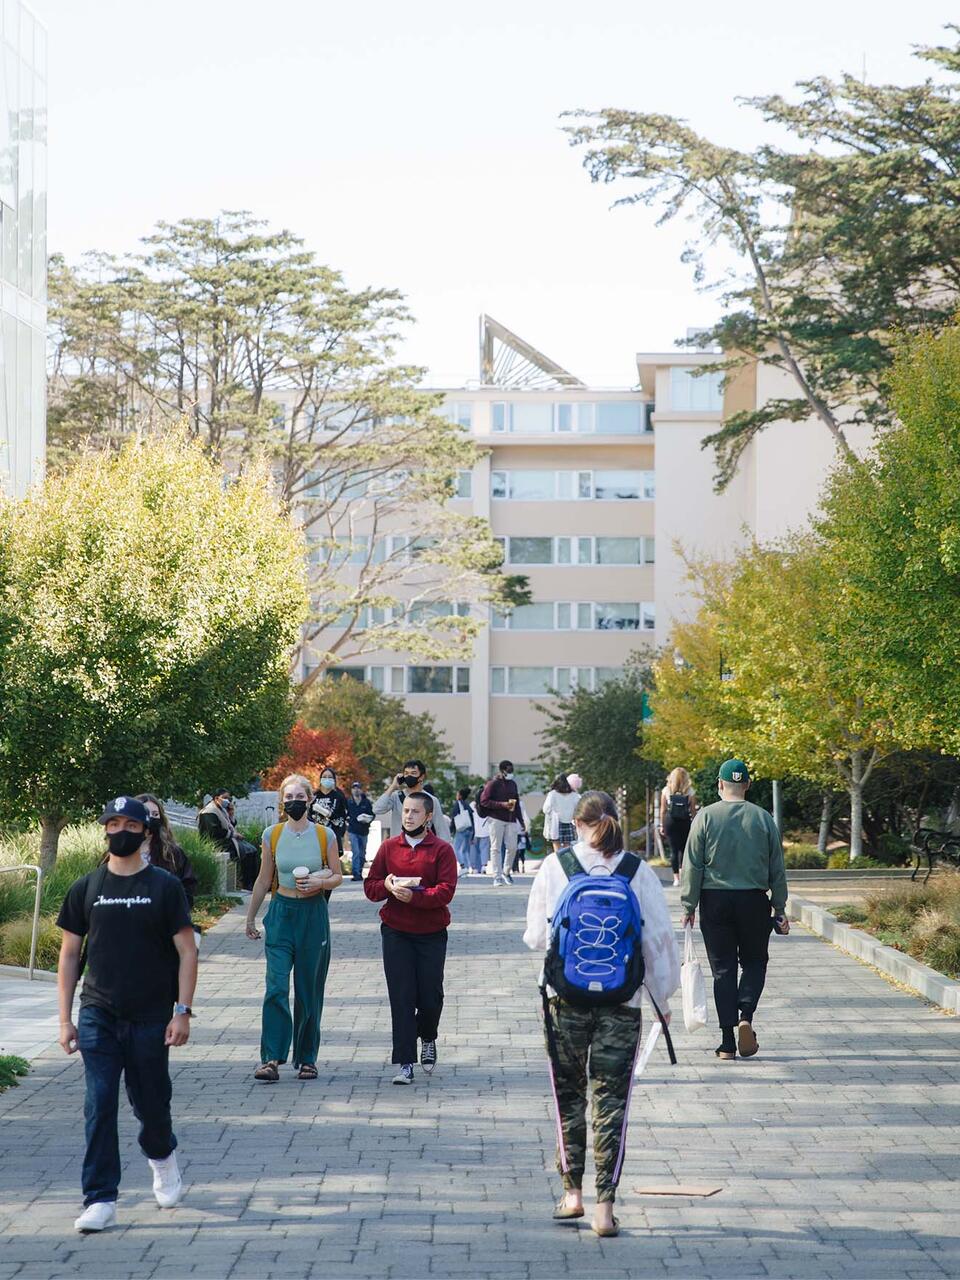 Students walk down a wide pathway through campus.